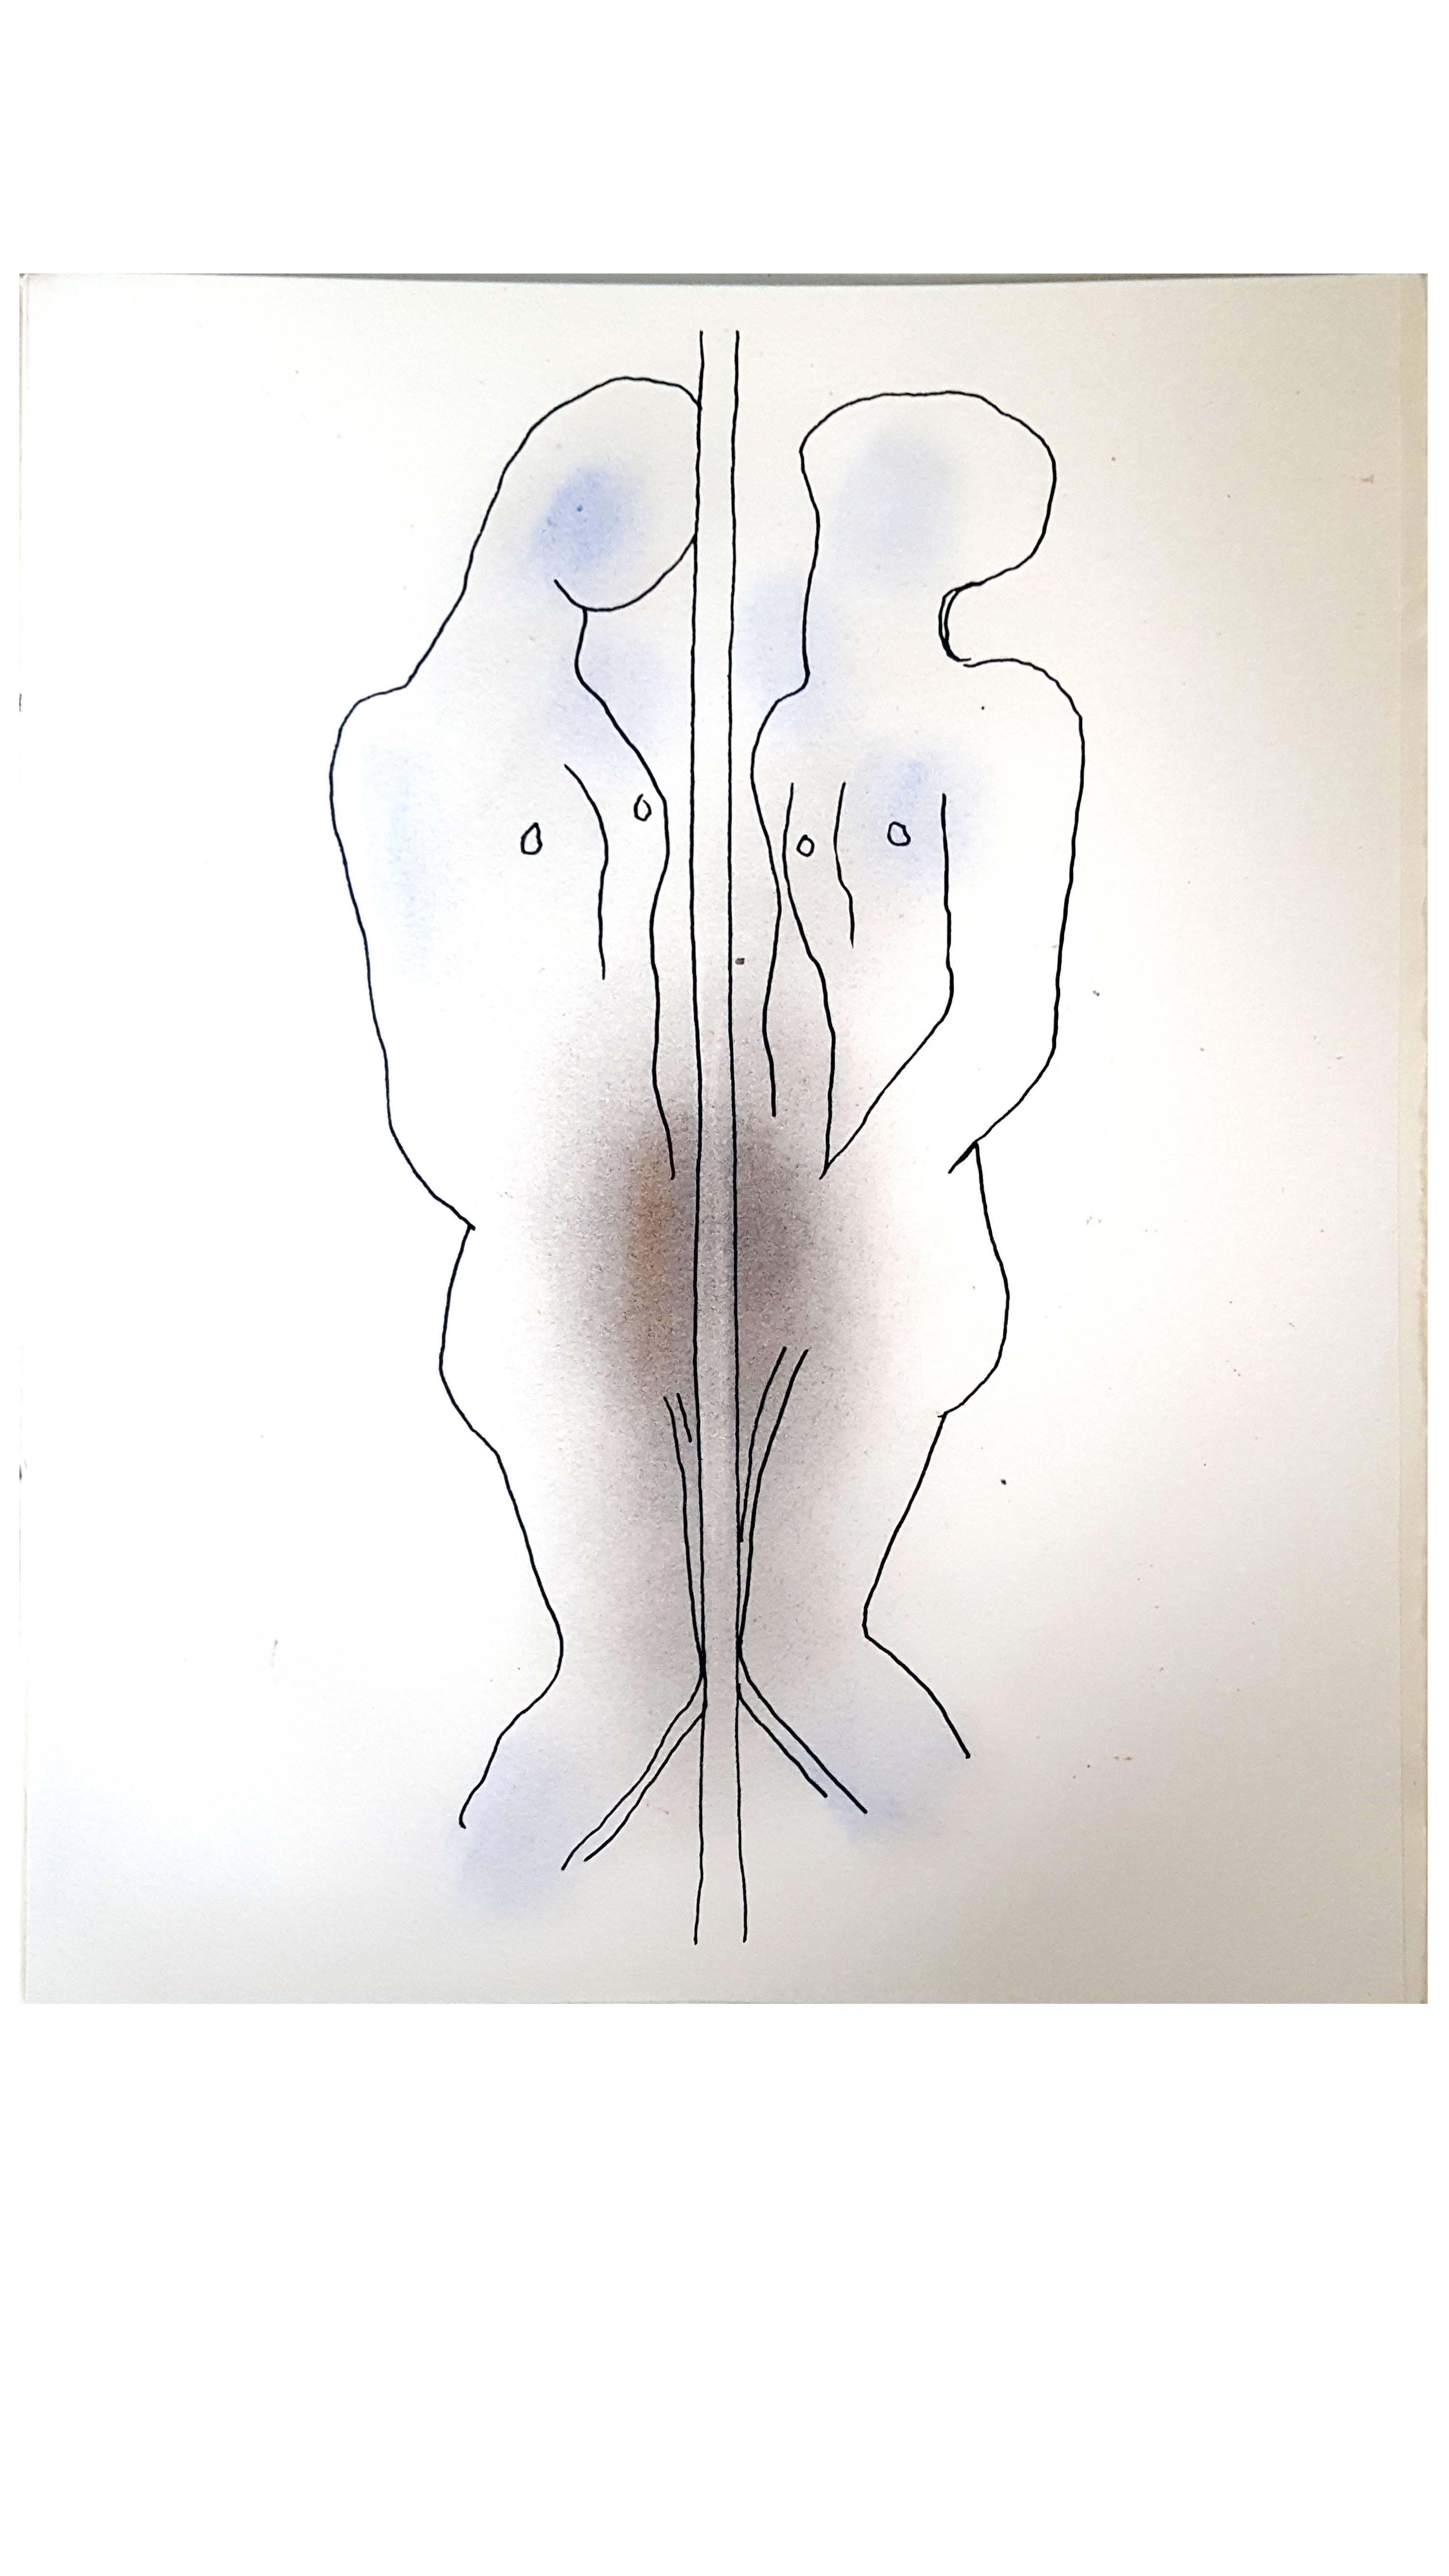 Jean Cocteau
White Book - Autobiography about Cocteau's discovery of his homosexuality. The book was first published anonymously and created a scandal.
Original Handcolored Lithograph
Dimensions: 28.4 x 22.8 cm
Edition of 380 on Vélin d’Arche
Paris,